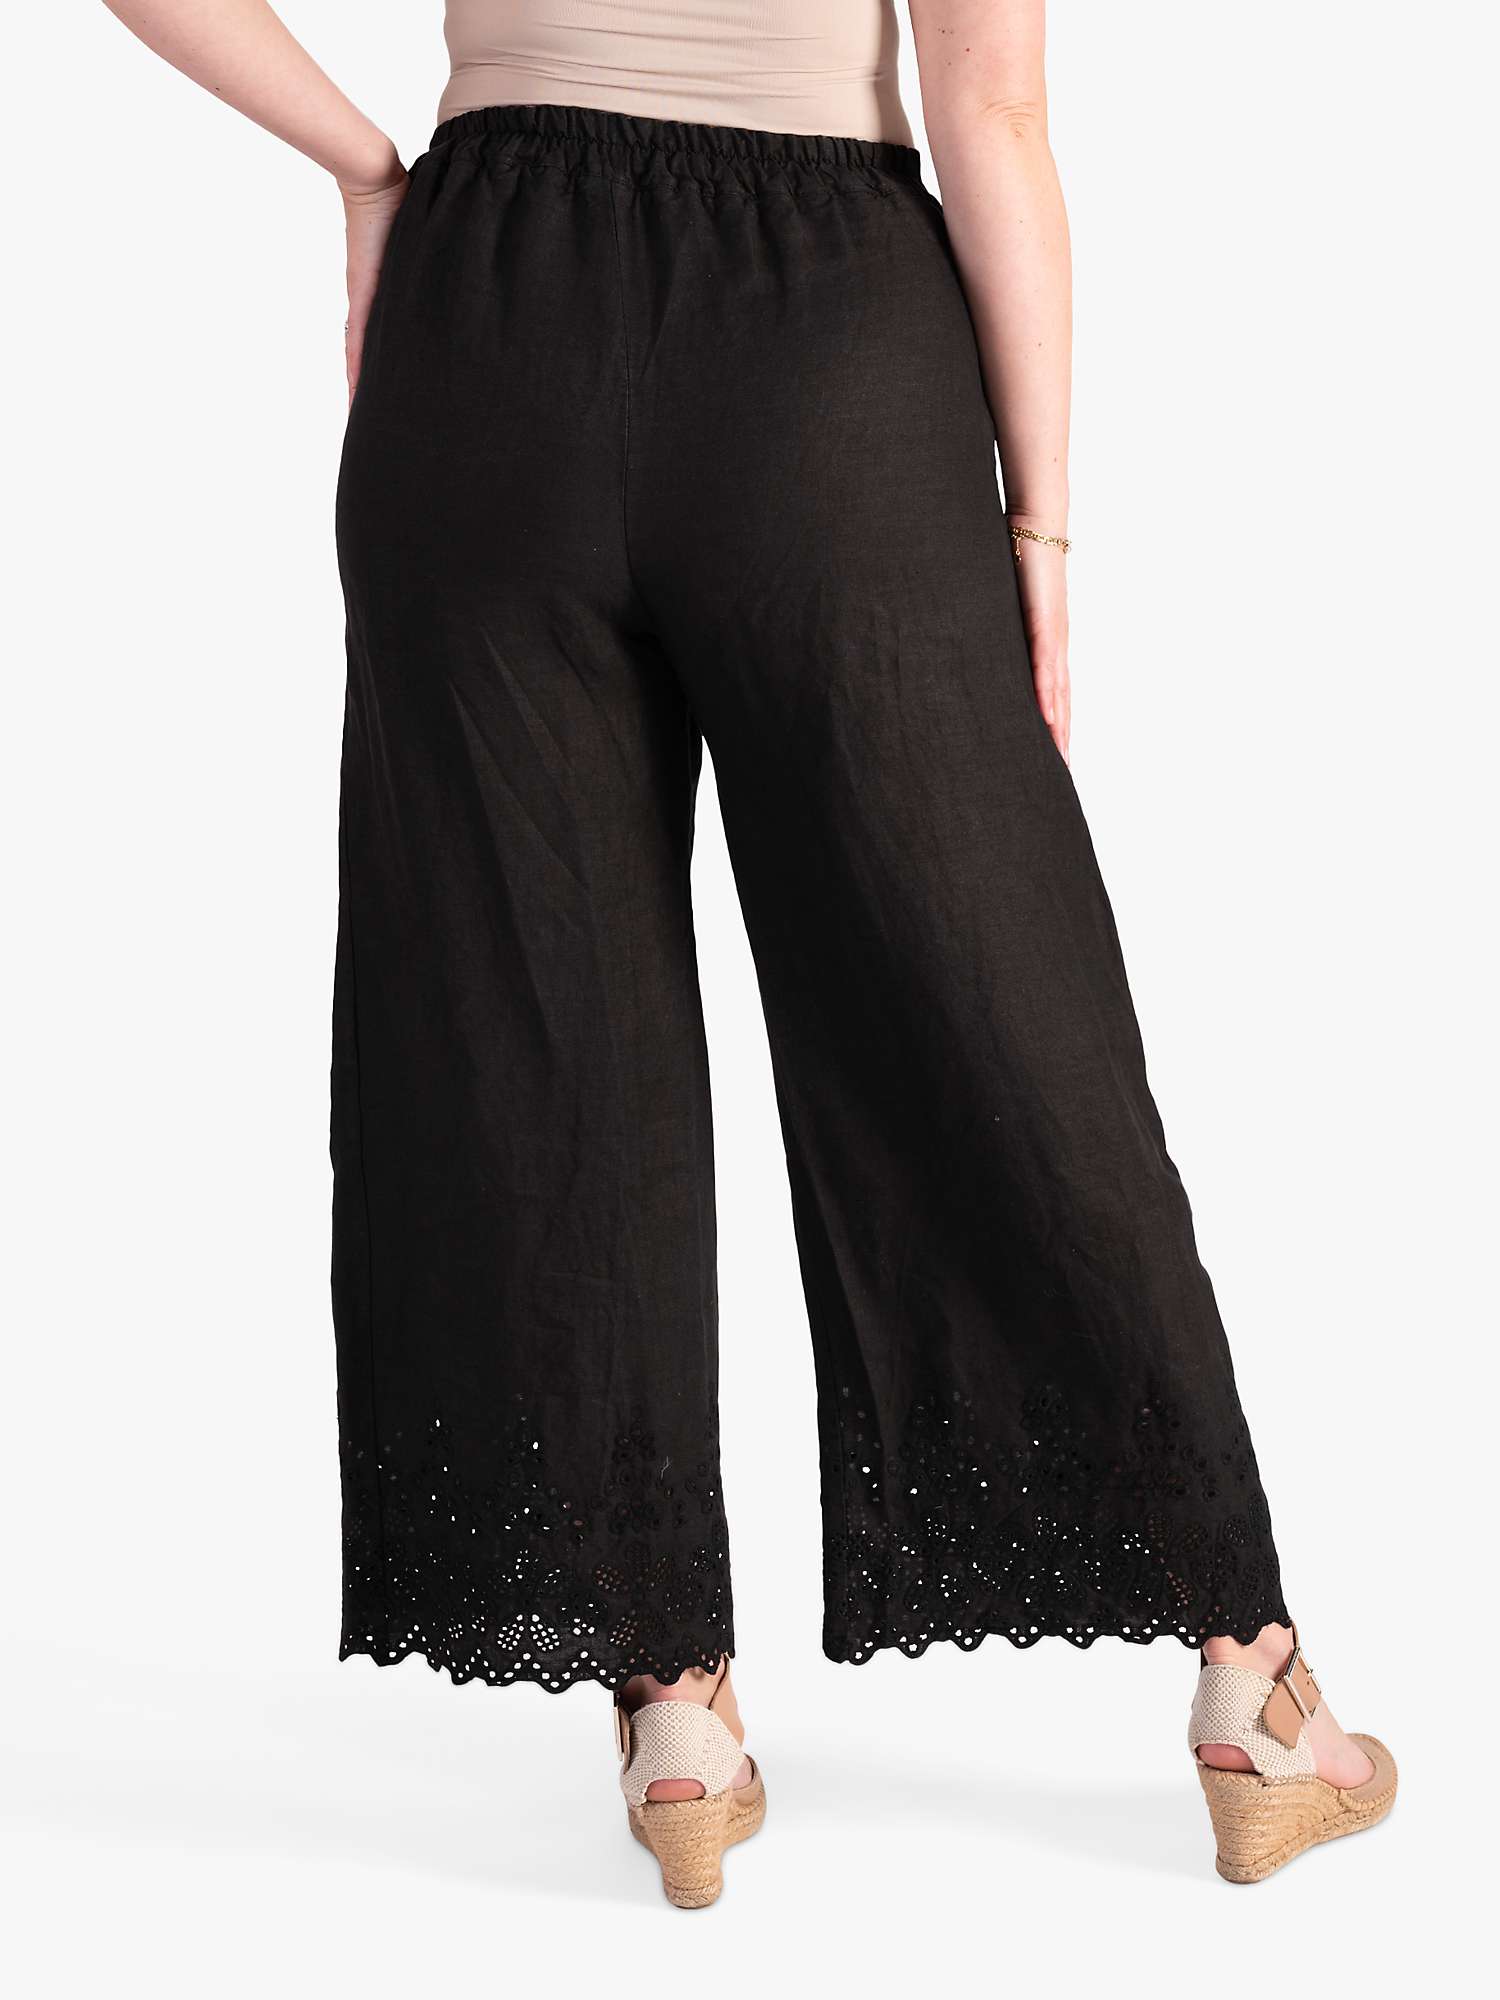 chesca Curve Lace Trim Embroidered Linen Trousers, Black at John Lewis ...